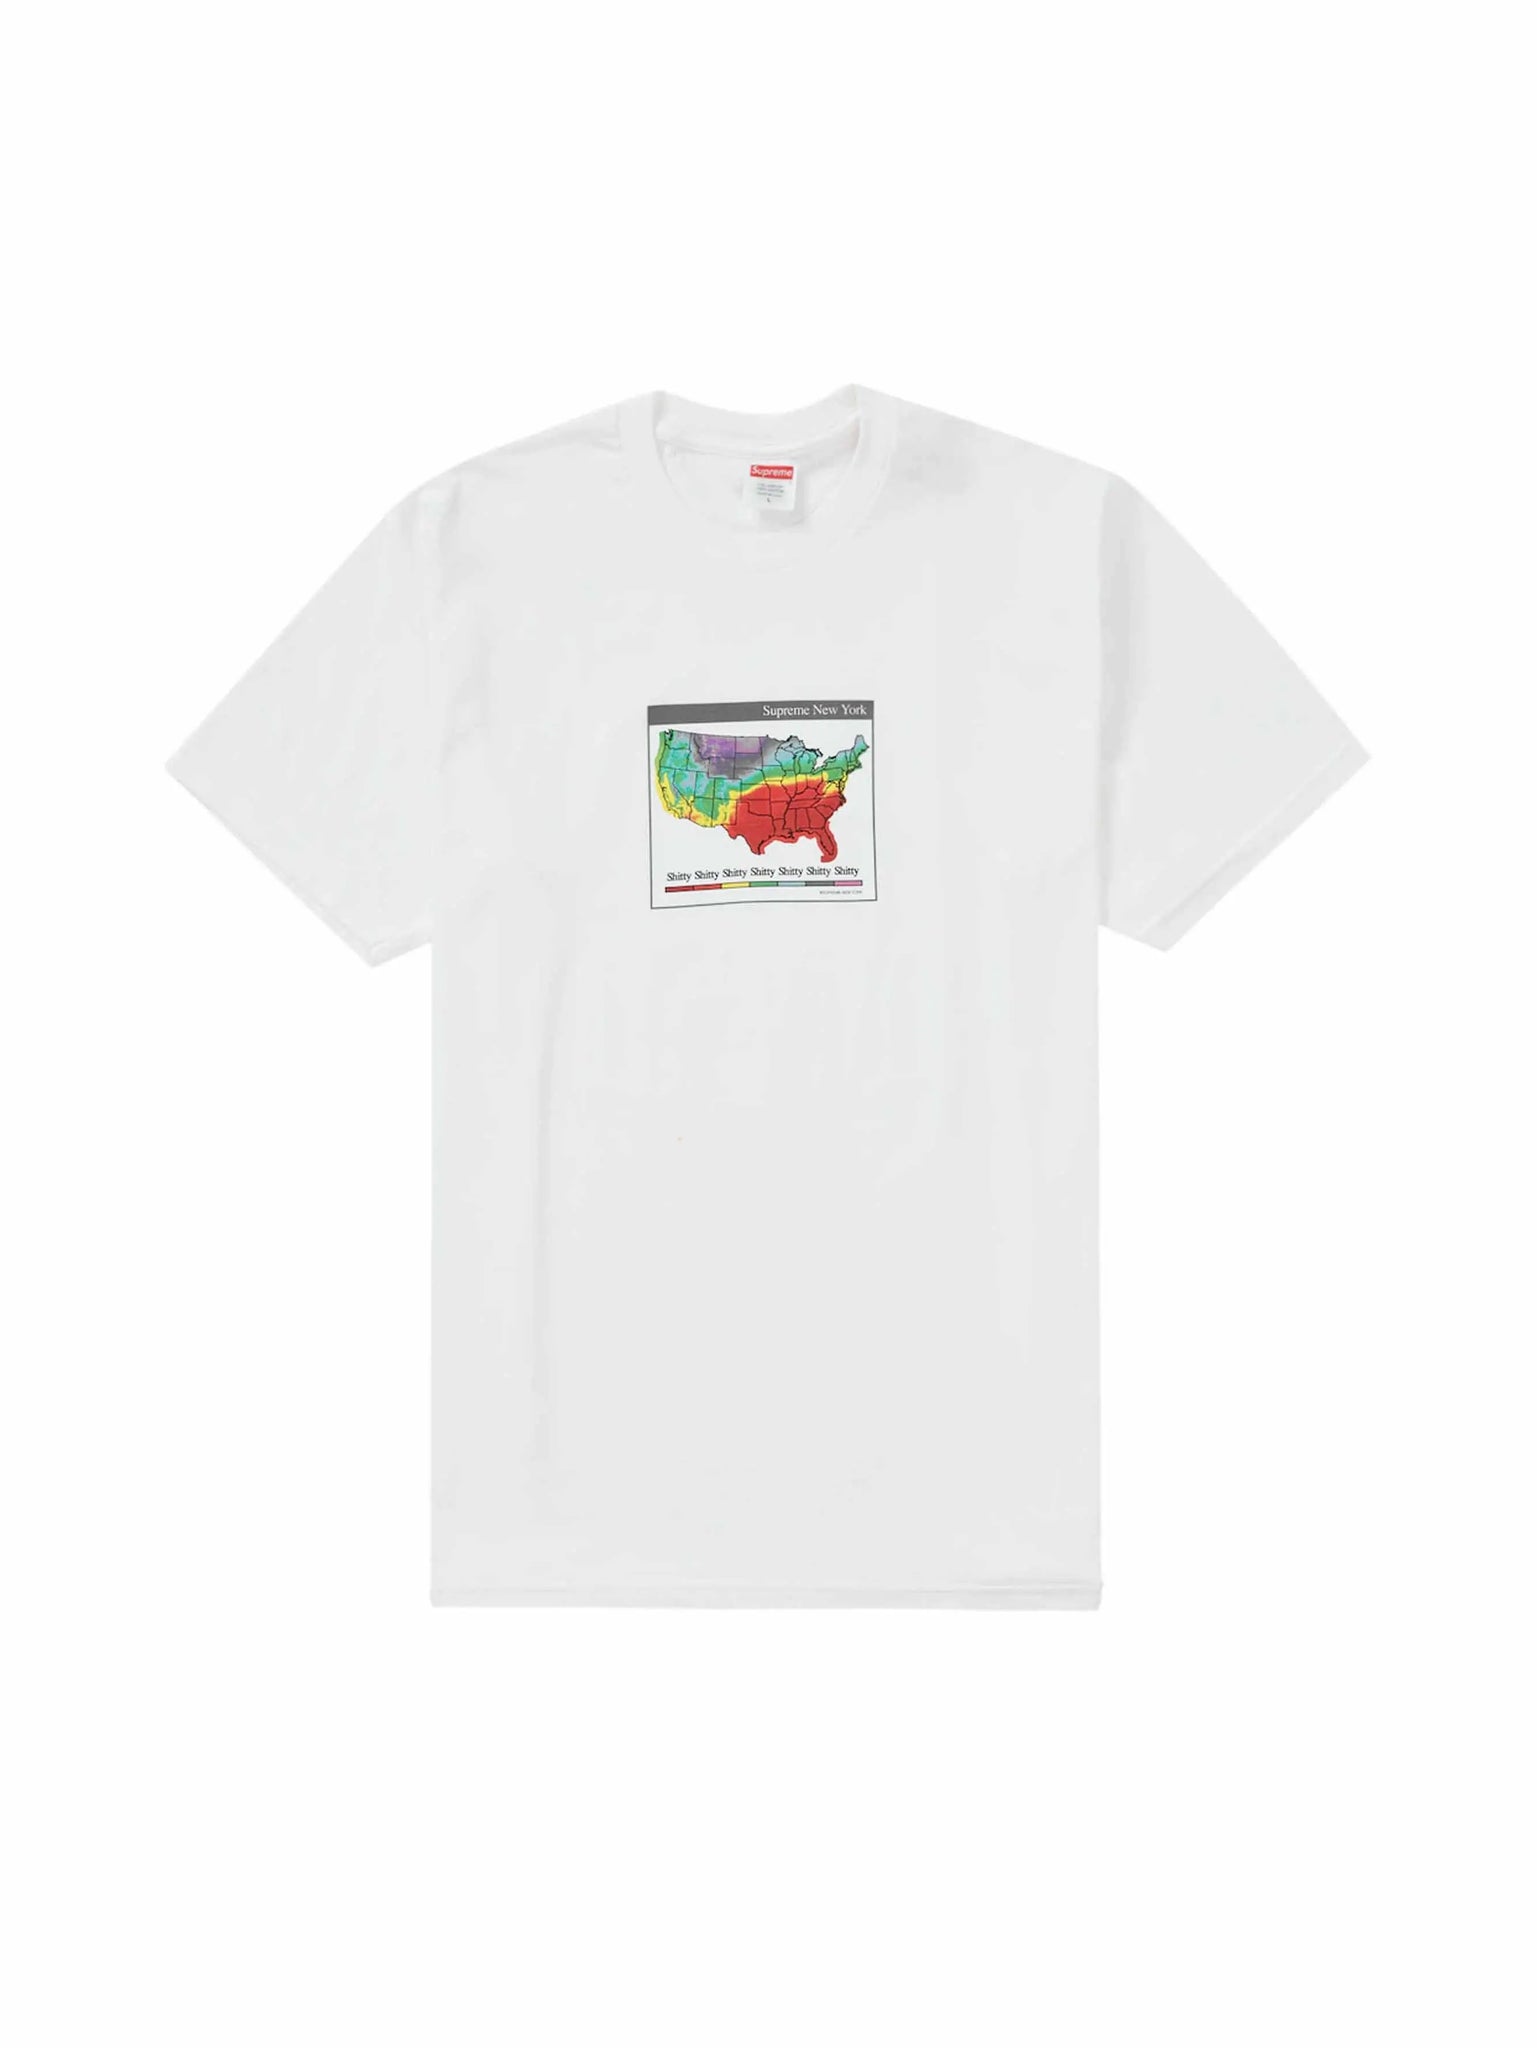 Supreme Weather Tee White in Auckland, New Zealand - Shop name